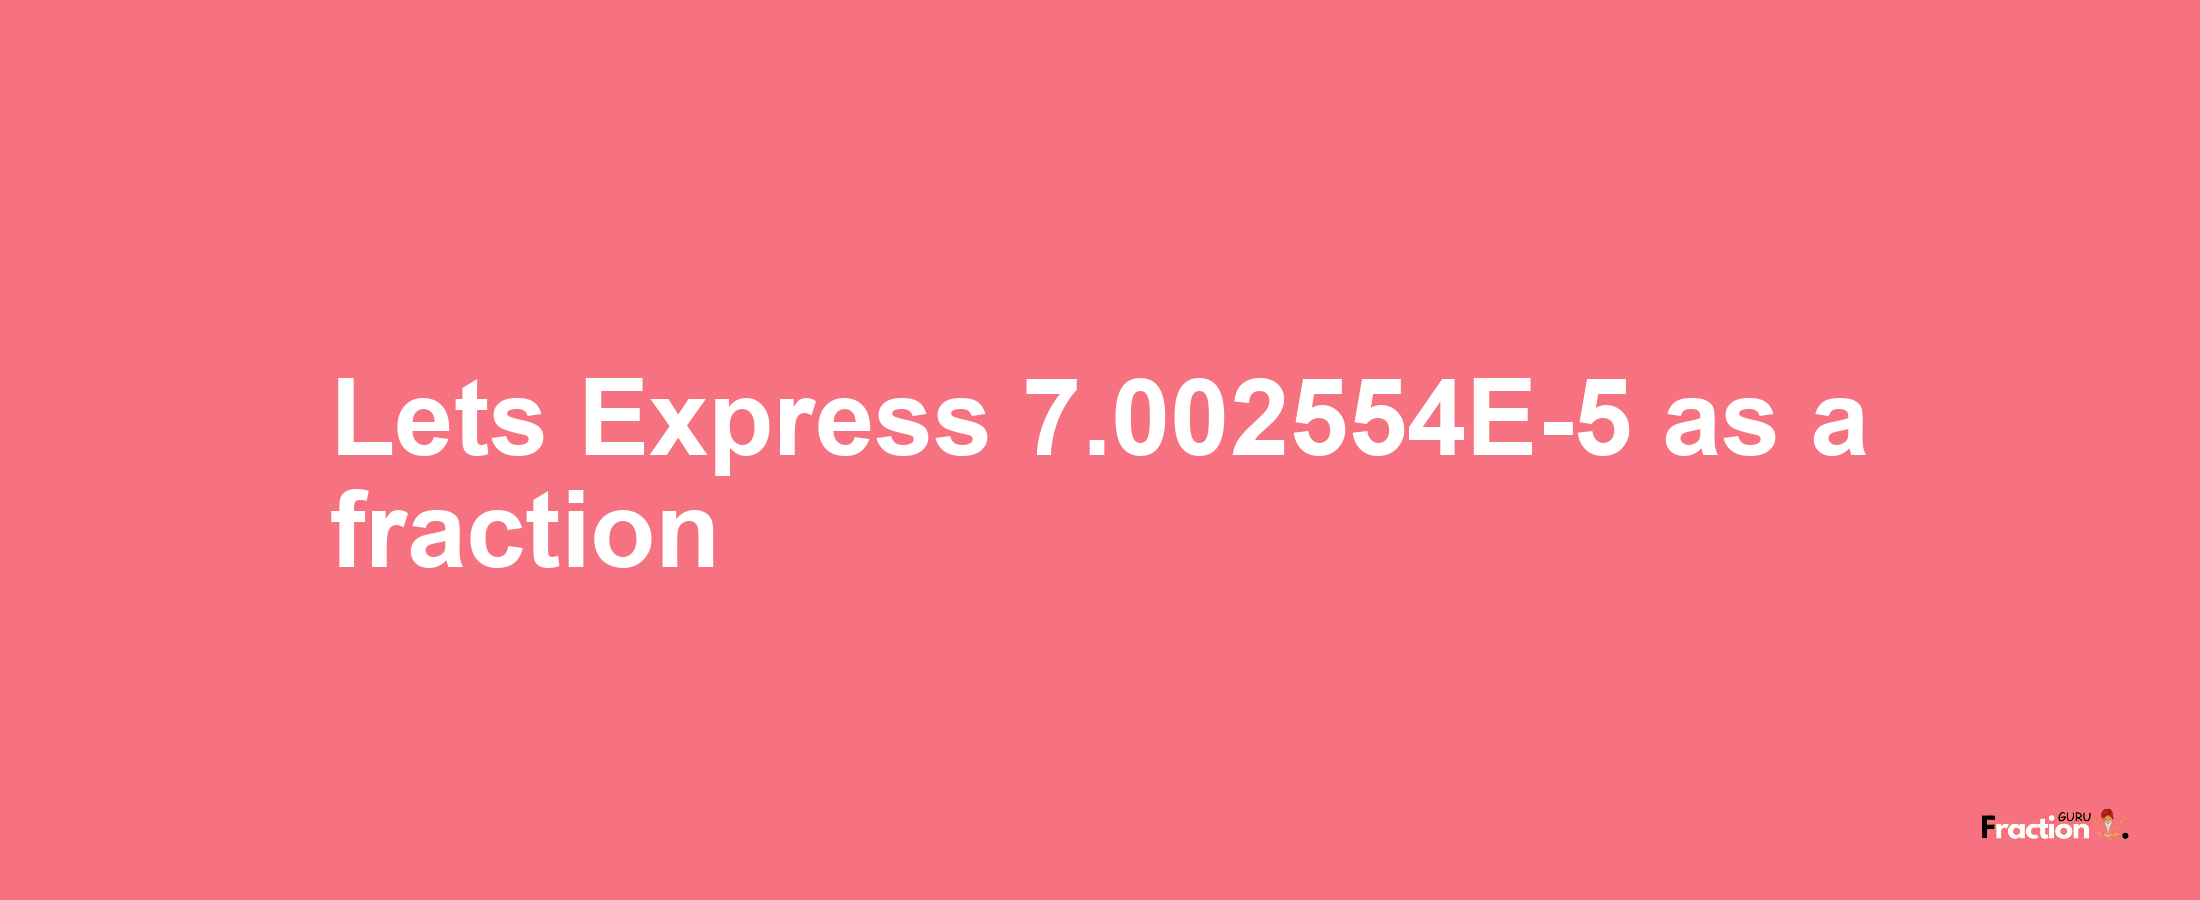 Lets Express 7.002554E-5 as afraction